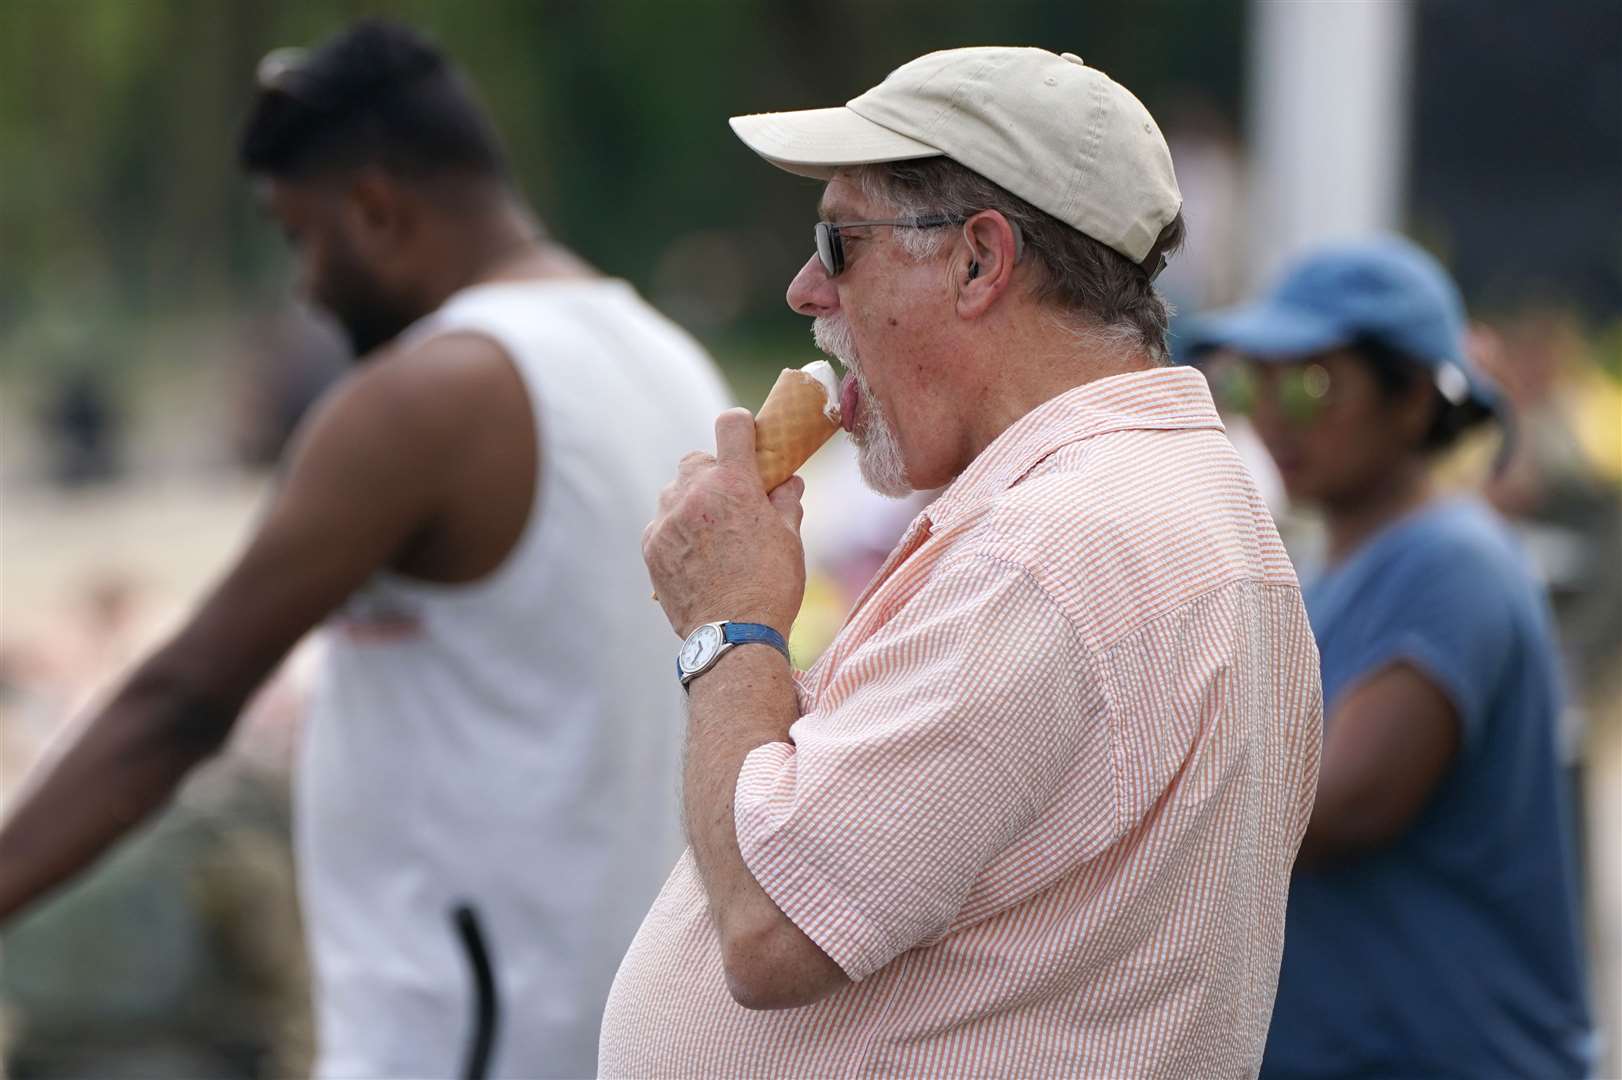 A man eating ice cream in the village of Luss, on the banks of Loch Lomond (Andrew Milligan/PA)